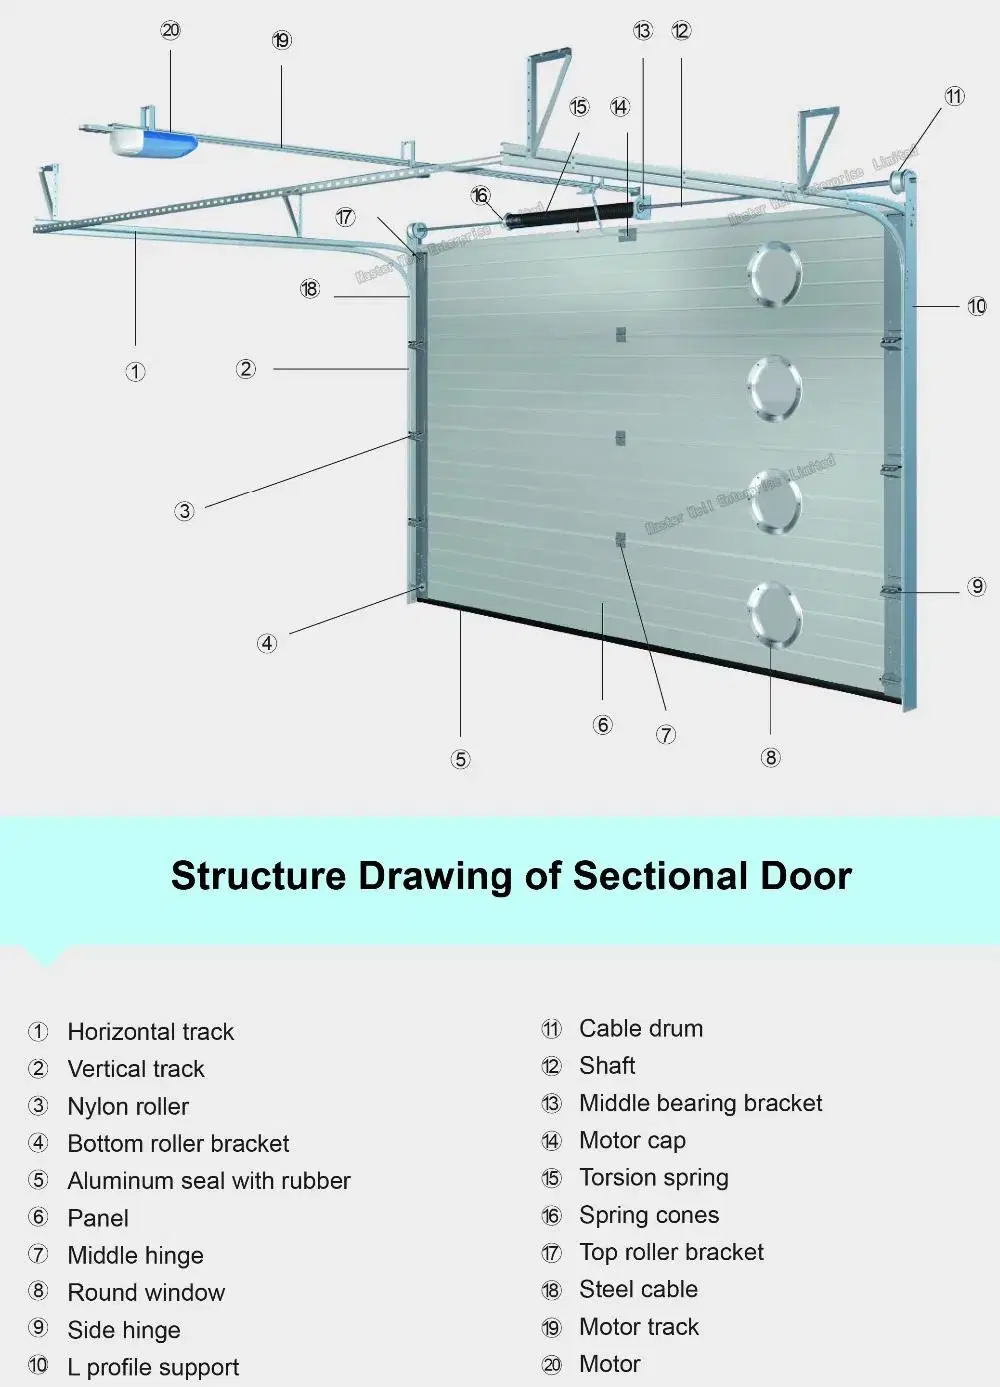 Master Well Cheap Price Overhead Electric Open Aluminum Frame Tempered Frosted Glass Garage Door for Home